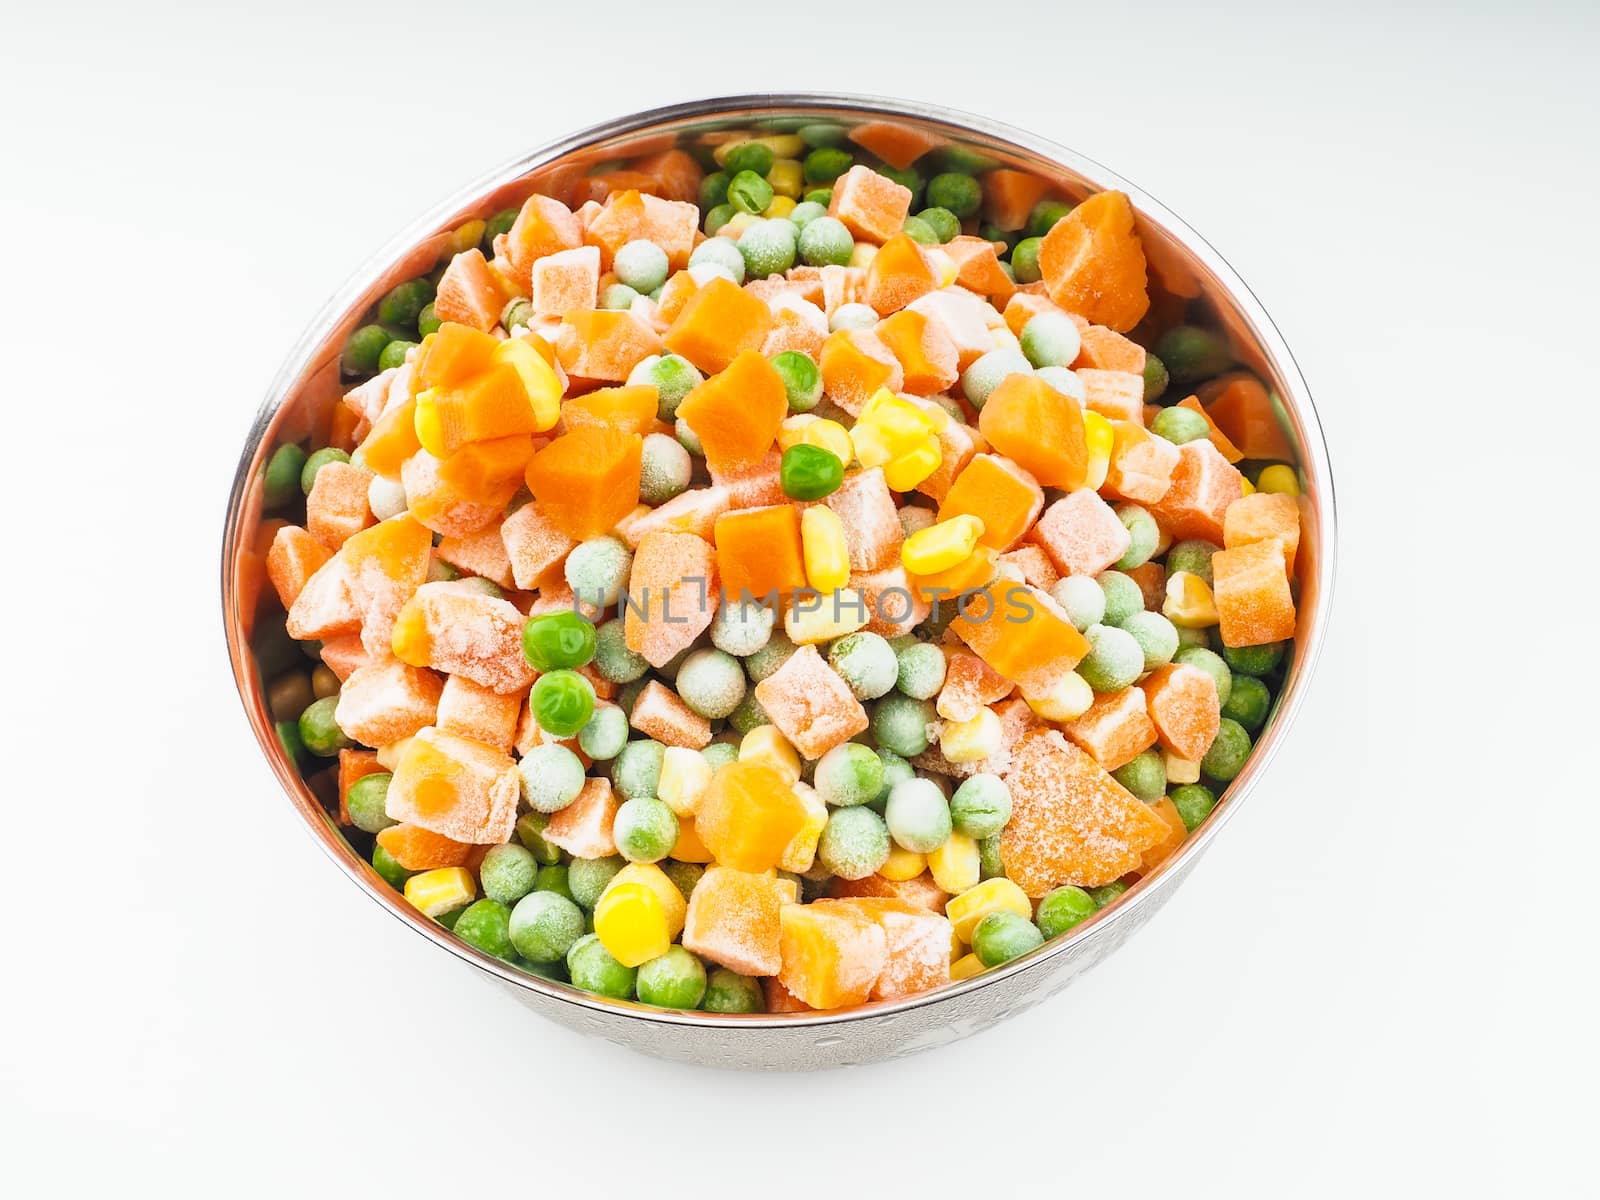 Frozen carrots, maize and peas, thawing in a steel bowl